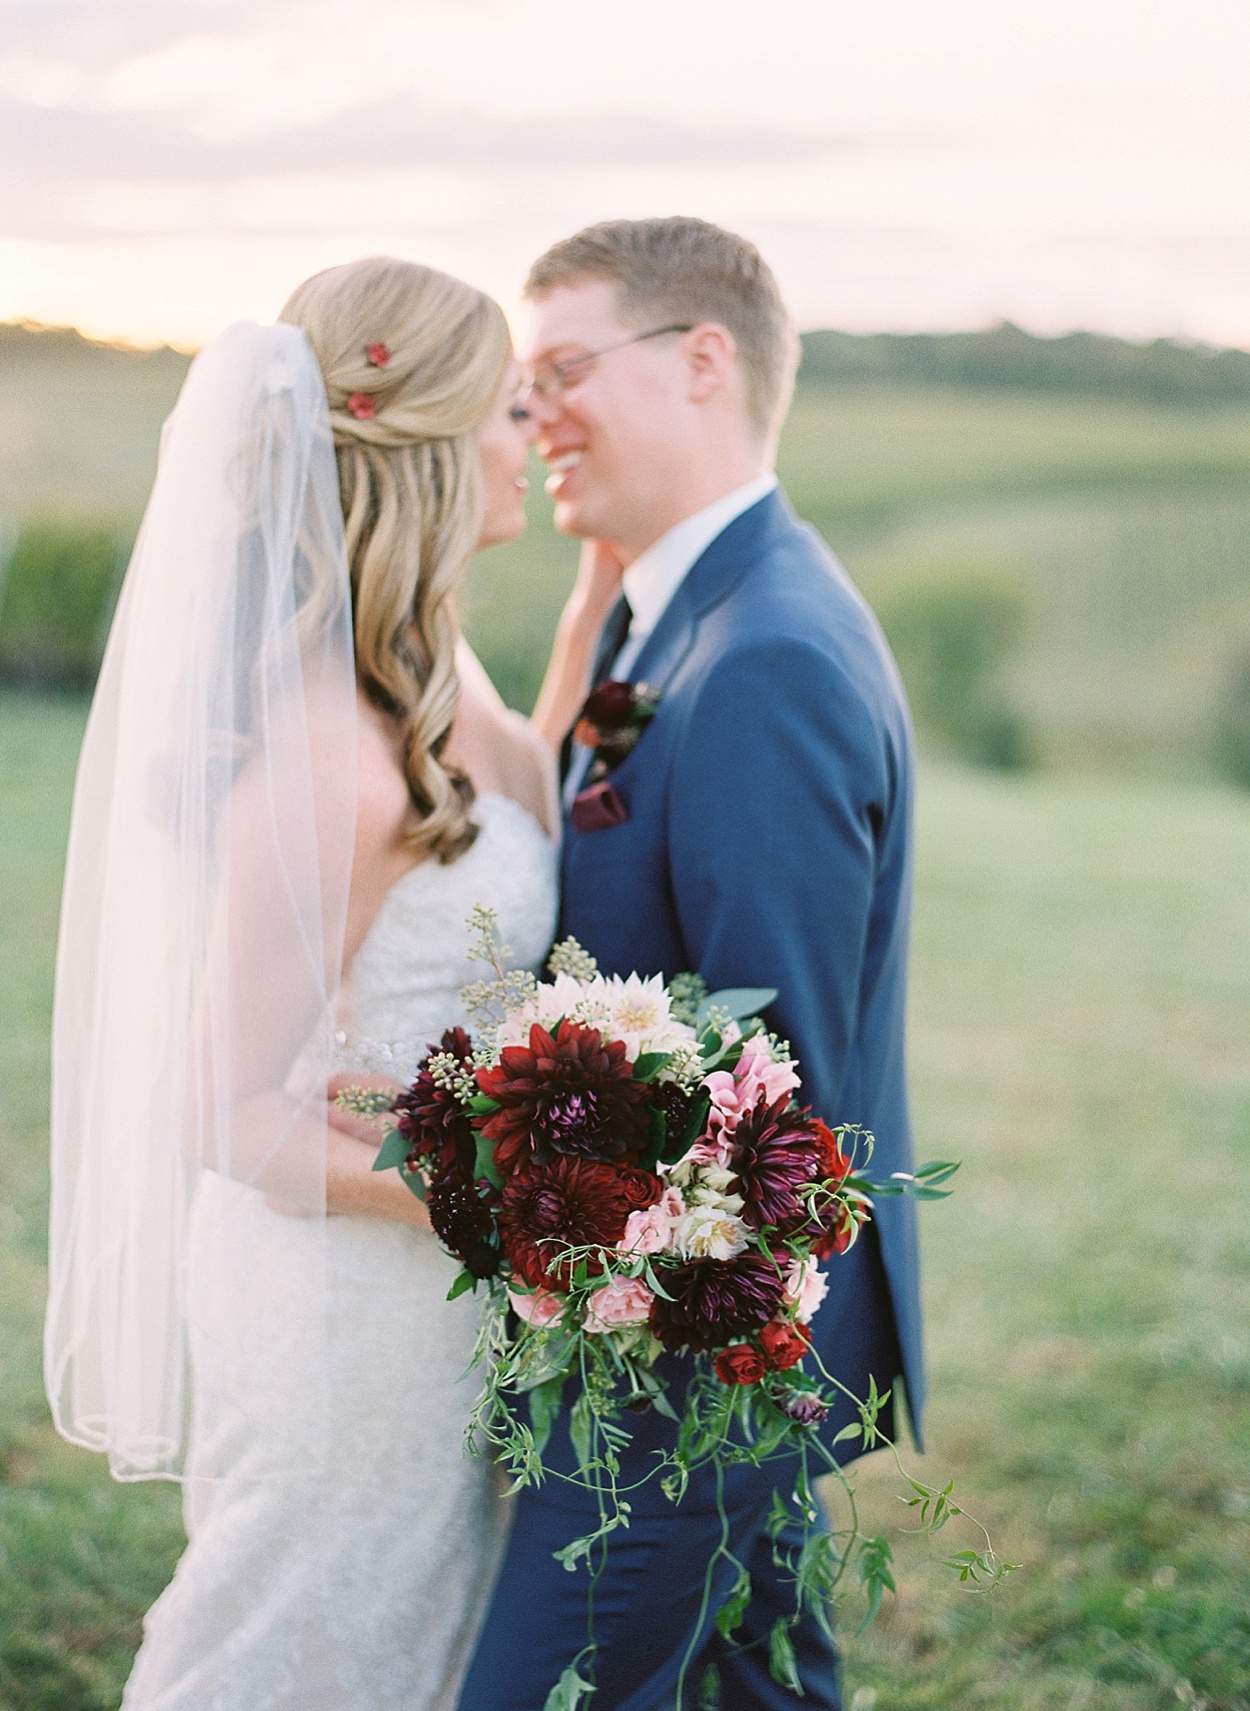 Stone Tower Winery wedding by Abby Grace